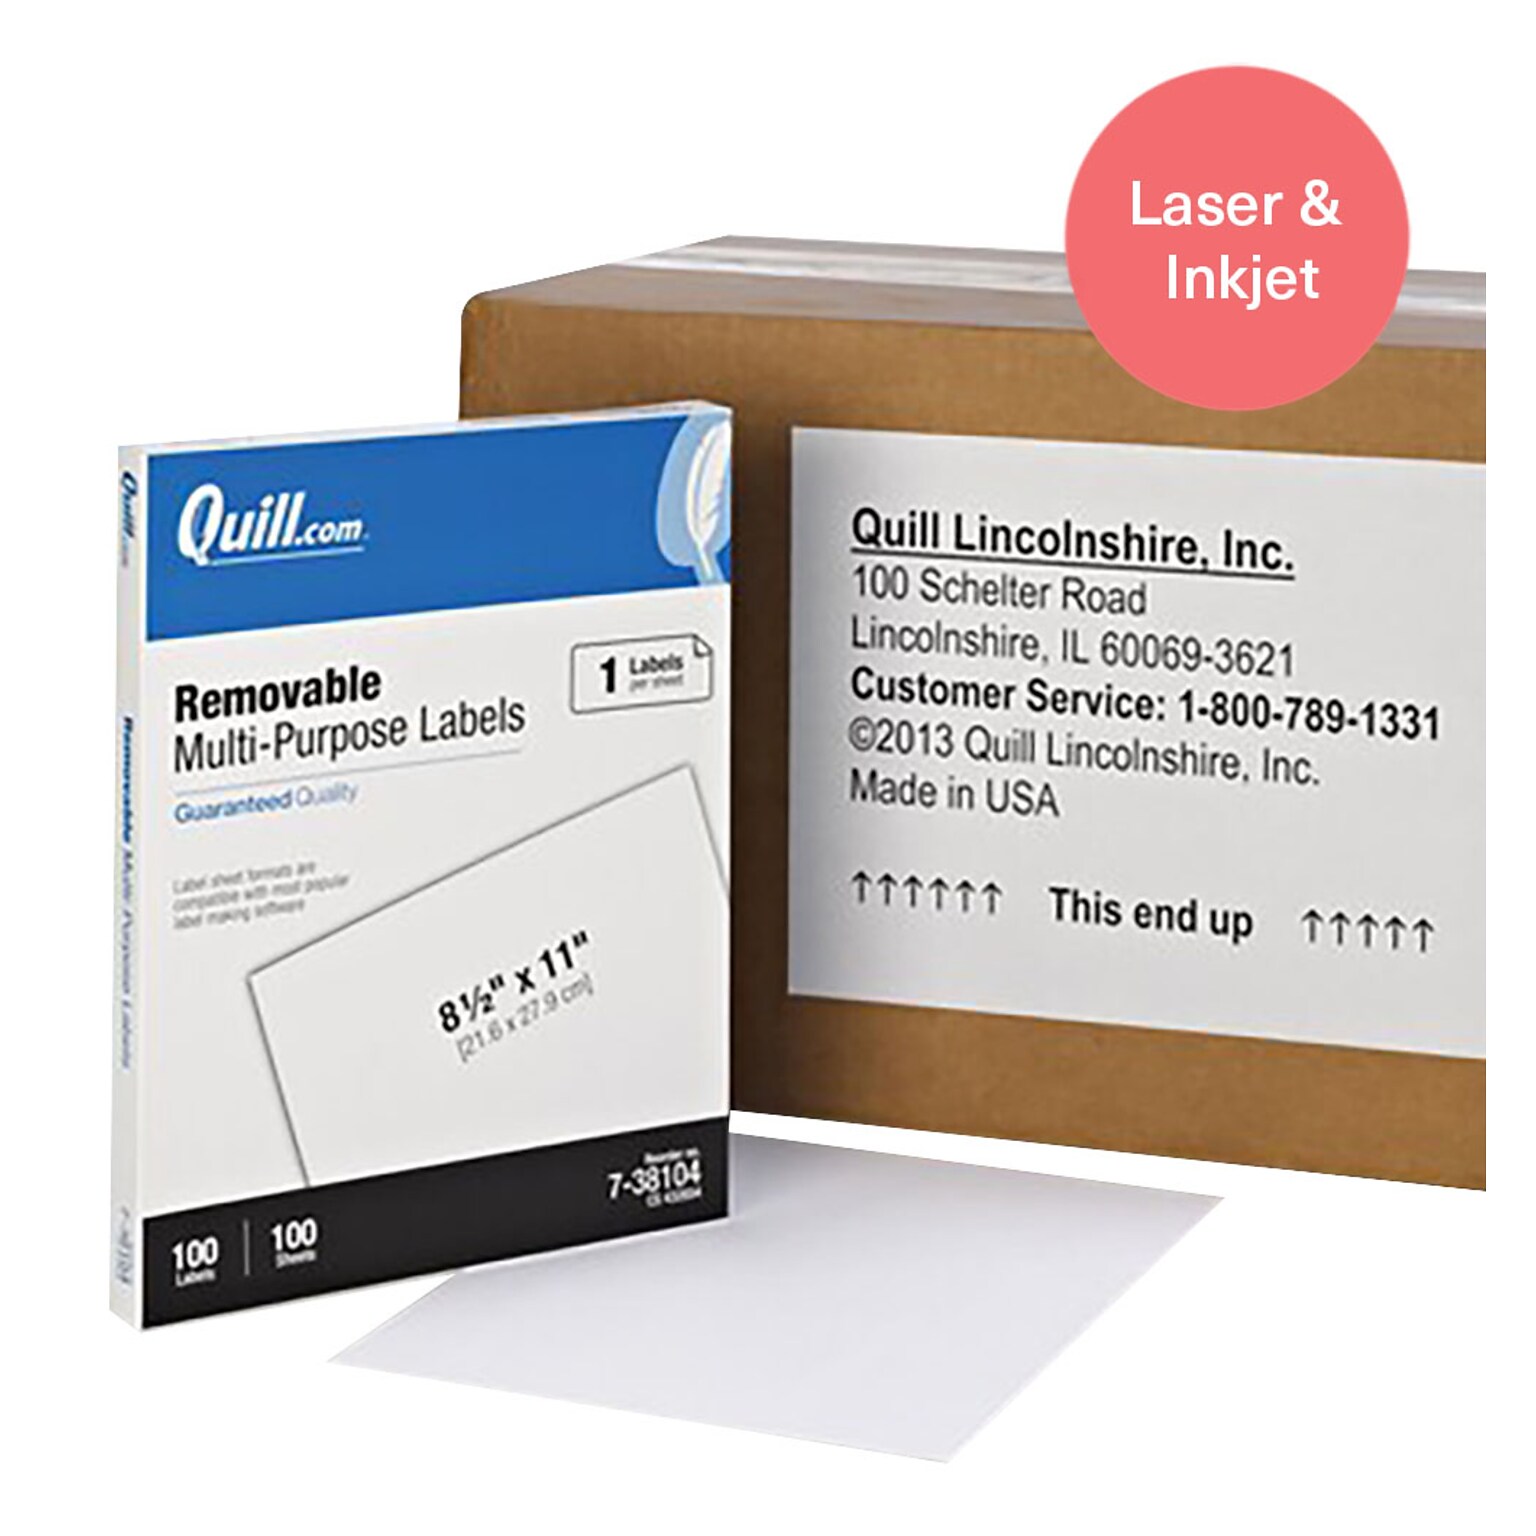 Quill Brand® Removable Laser/Inkjet Labels, 8-1/2 x 11, White, 100 Labels (Comparable to Avery 6465)